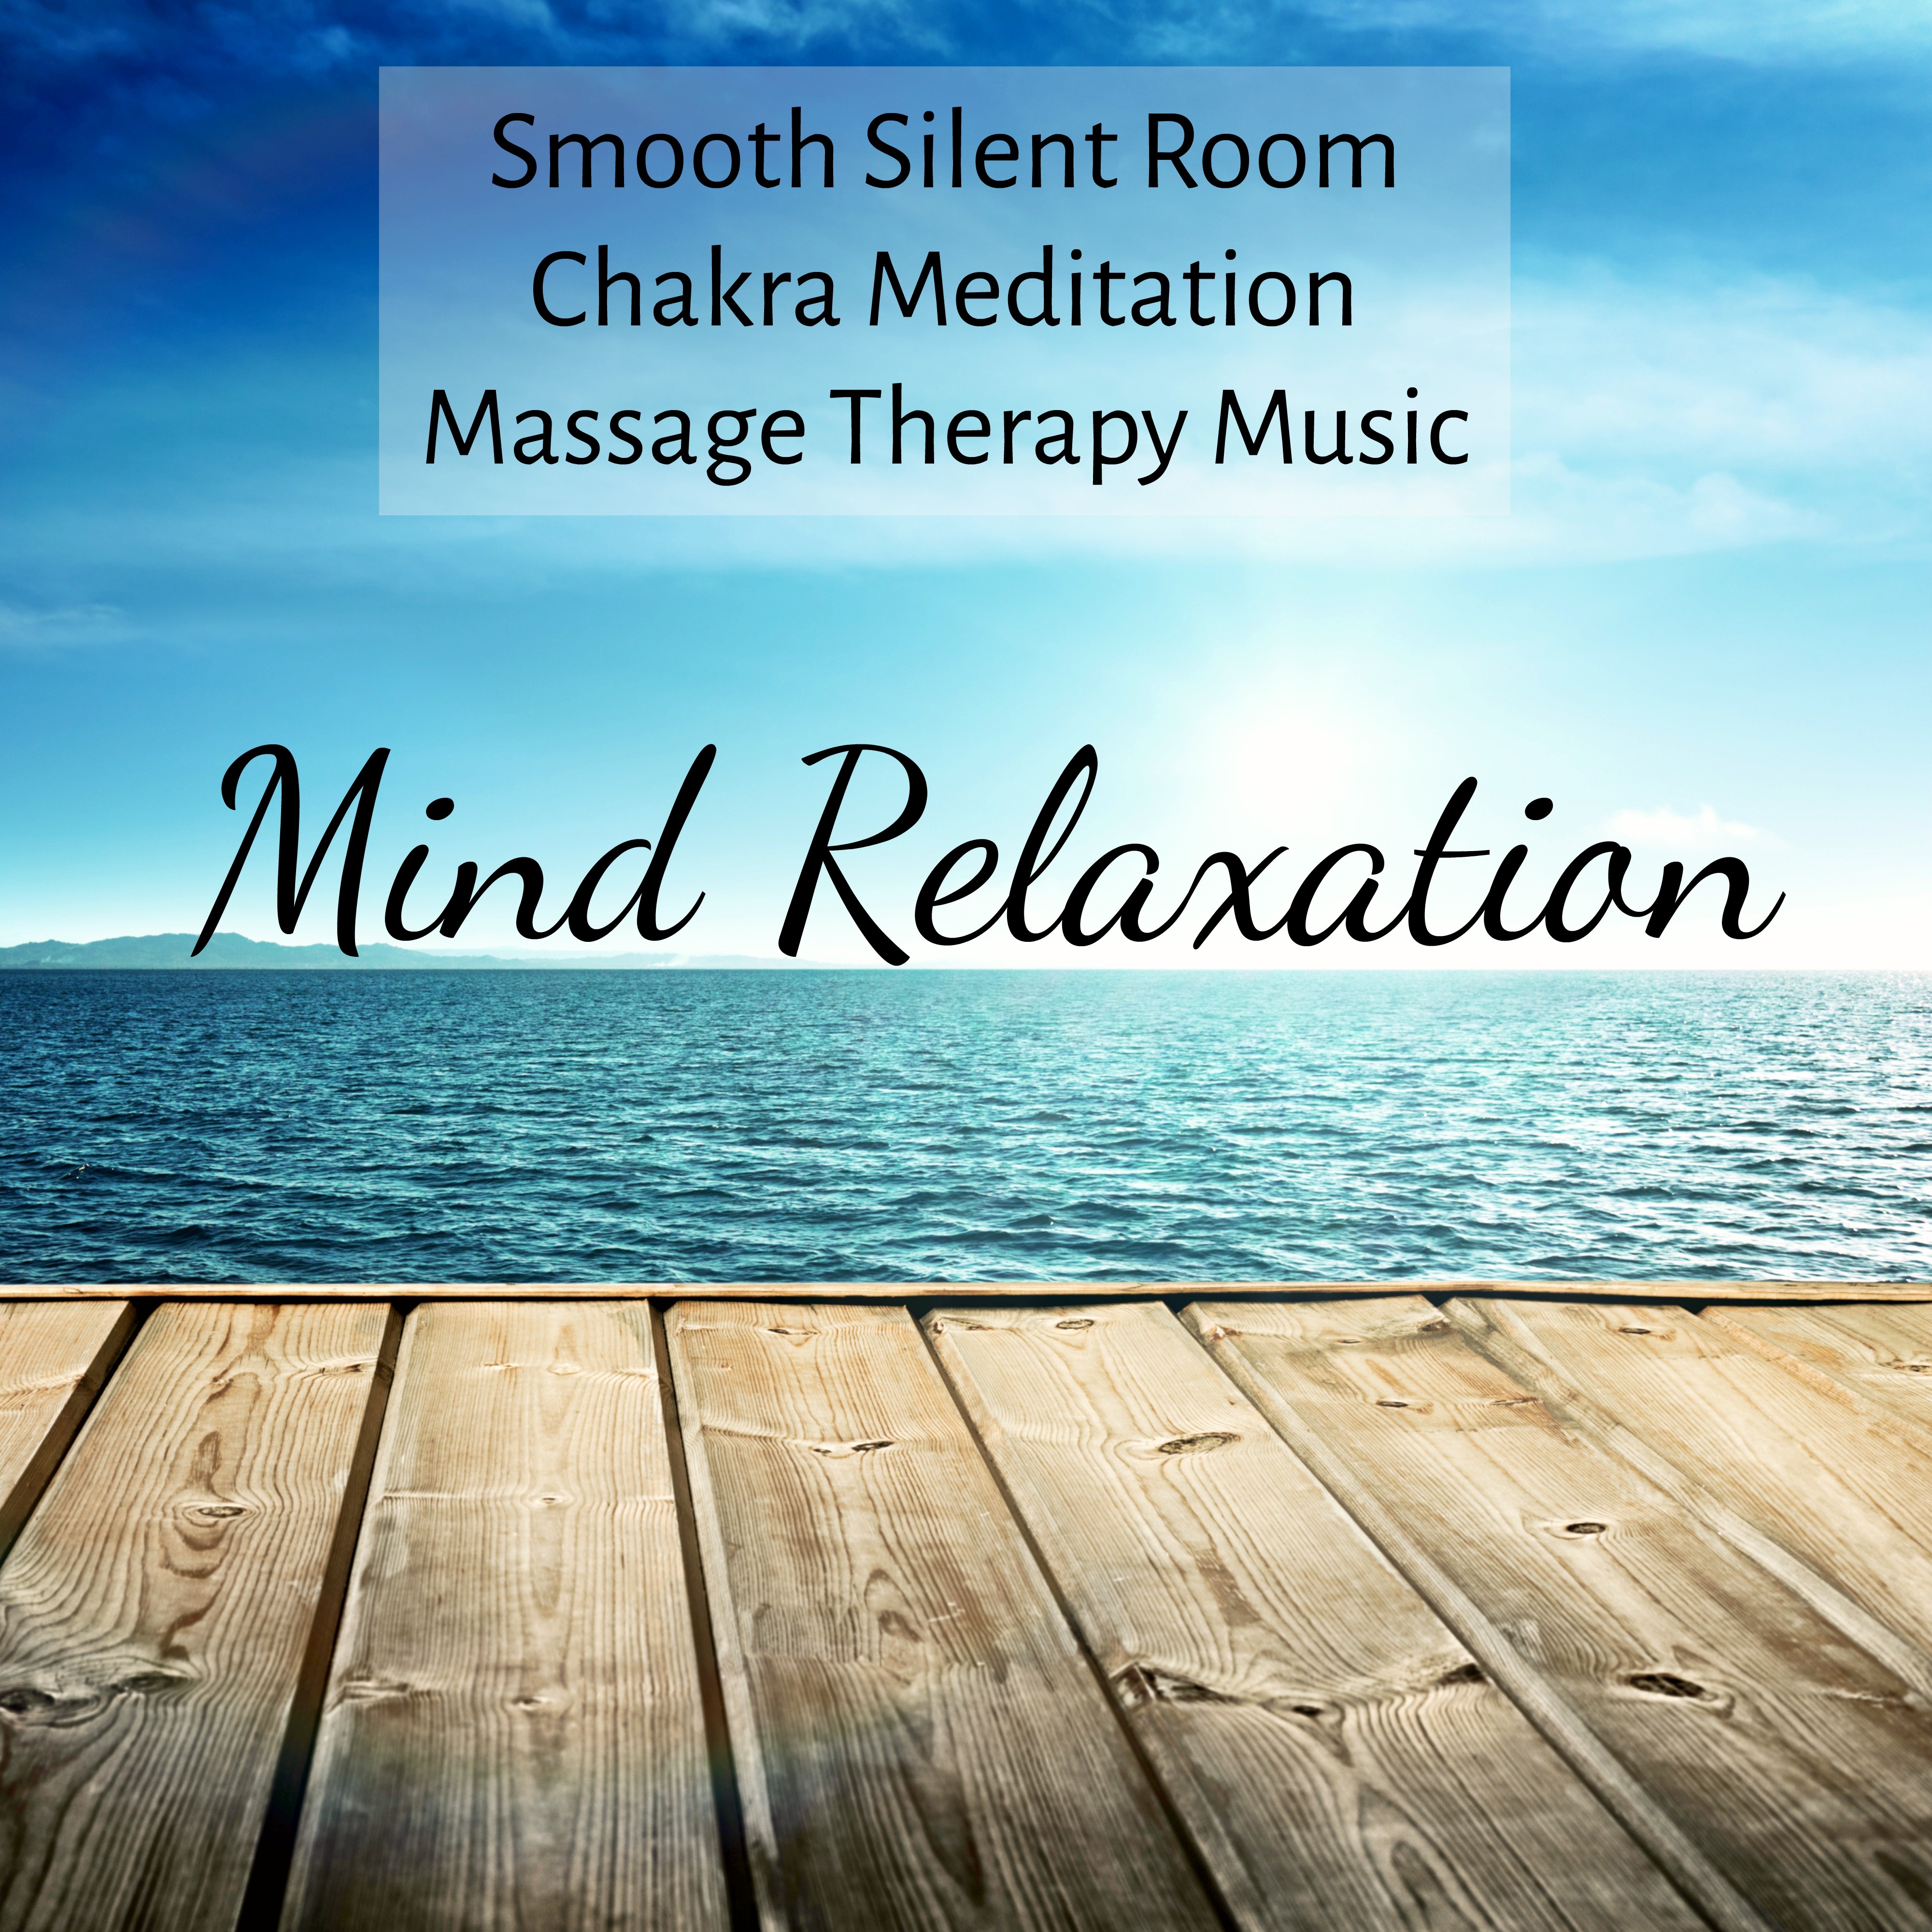 Mind Relaxation - Smooth Silent Room Chakra Meditation Massage Therapy Music with Instrumental Nature Wellness Consciousness Expansion Sounds